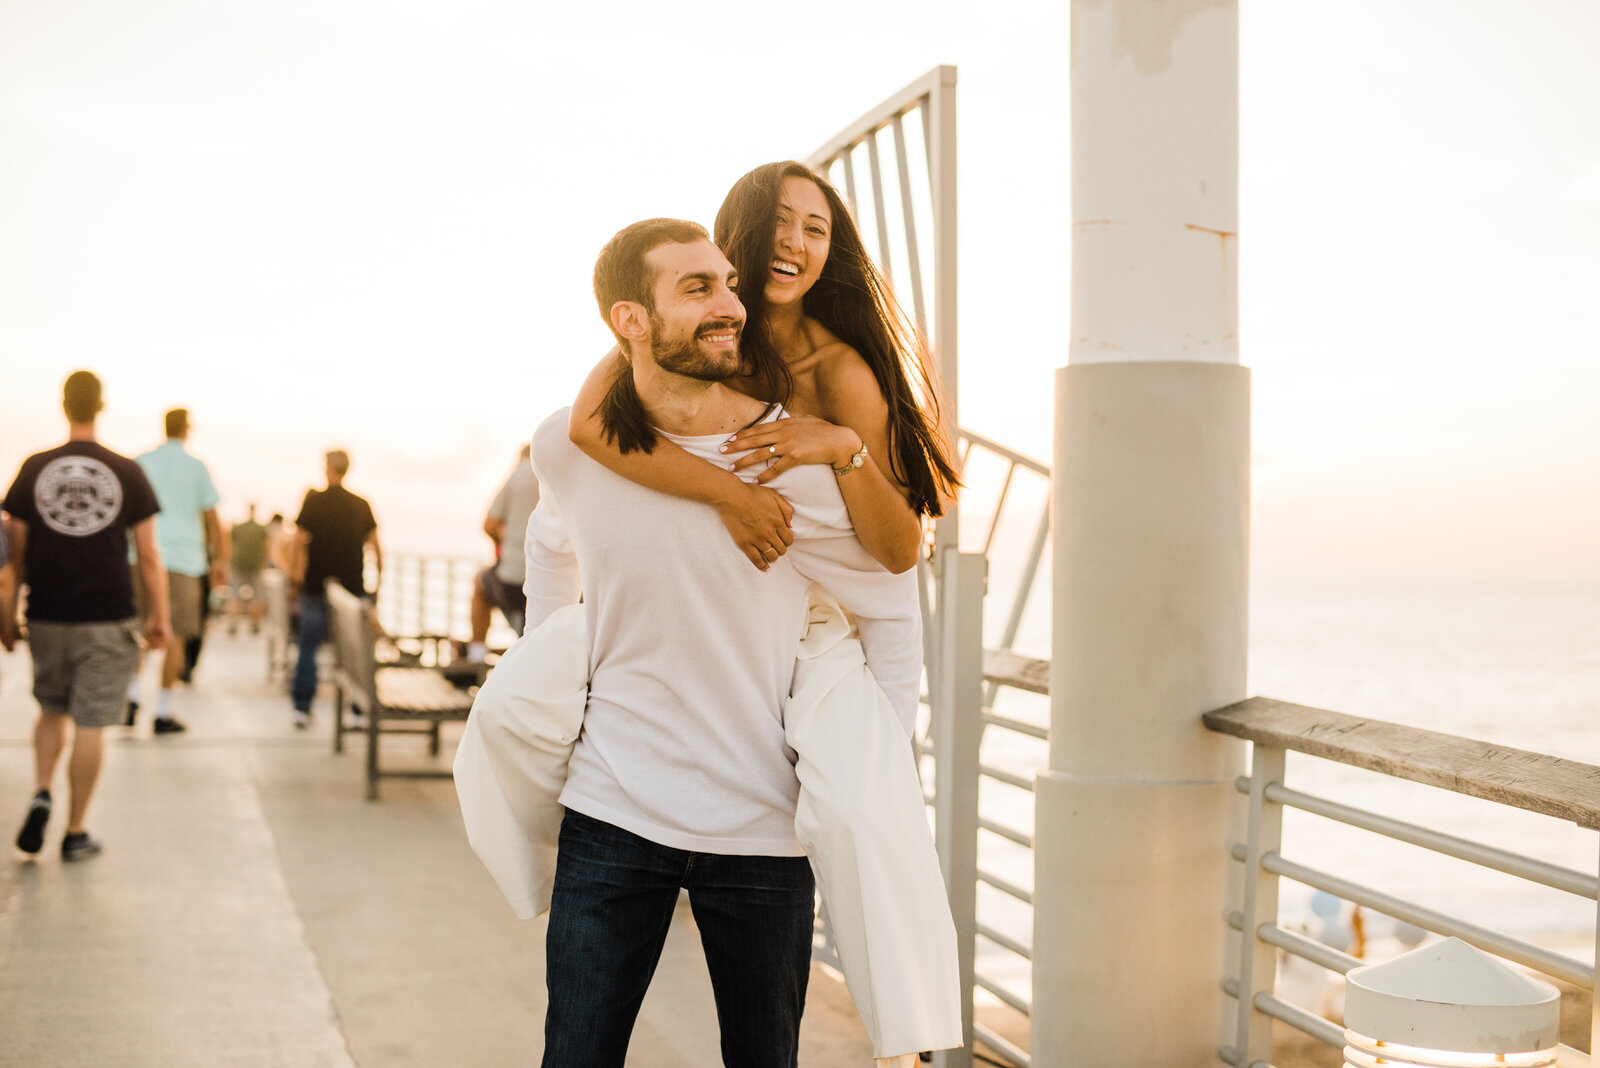 playful, energetic engagement photos at Hermosa Beach Pier